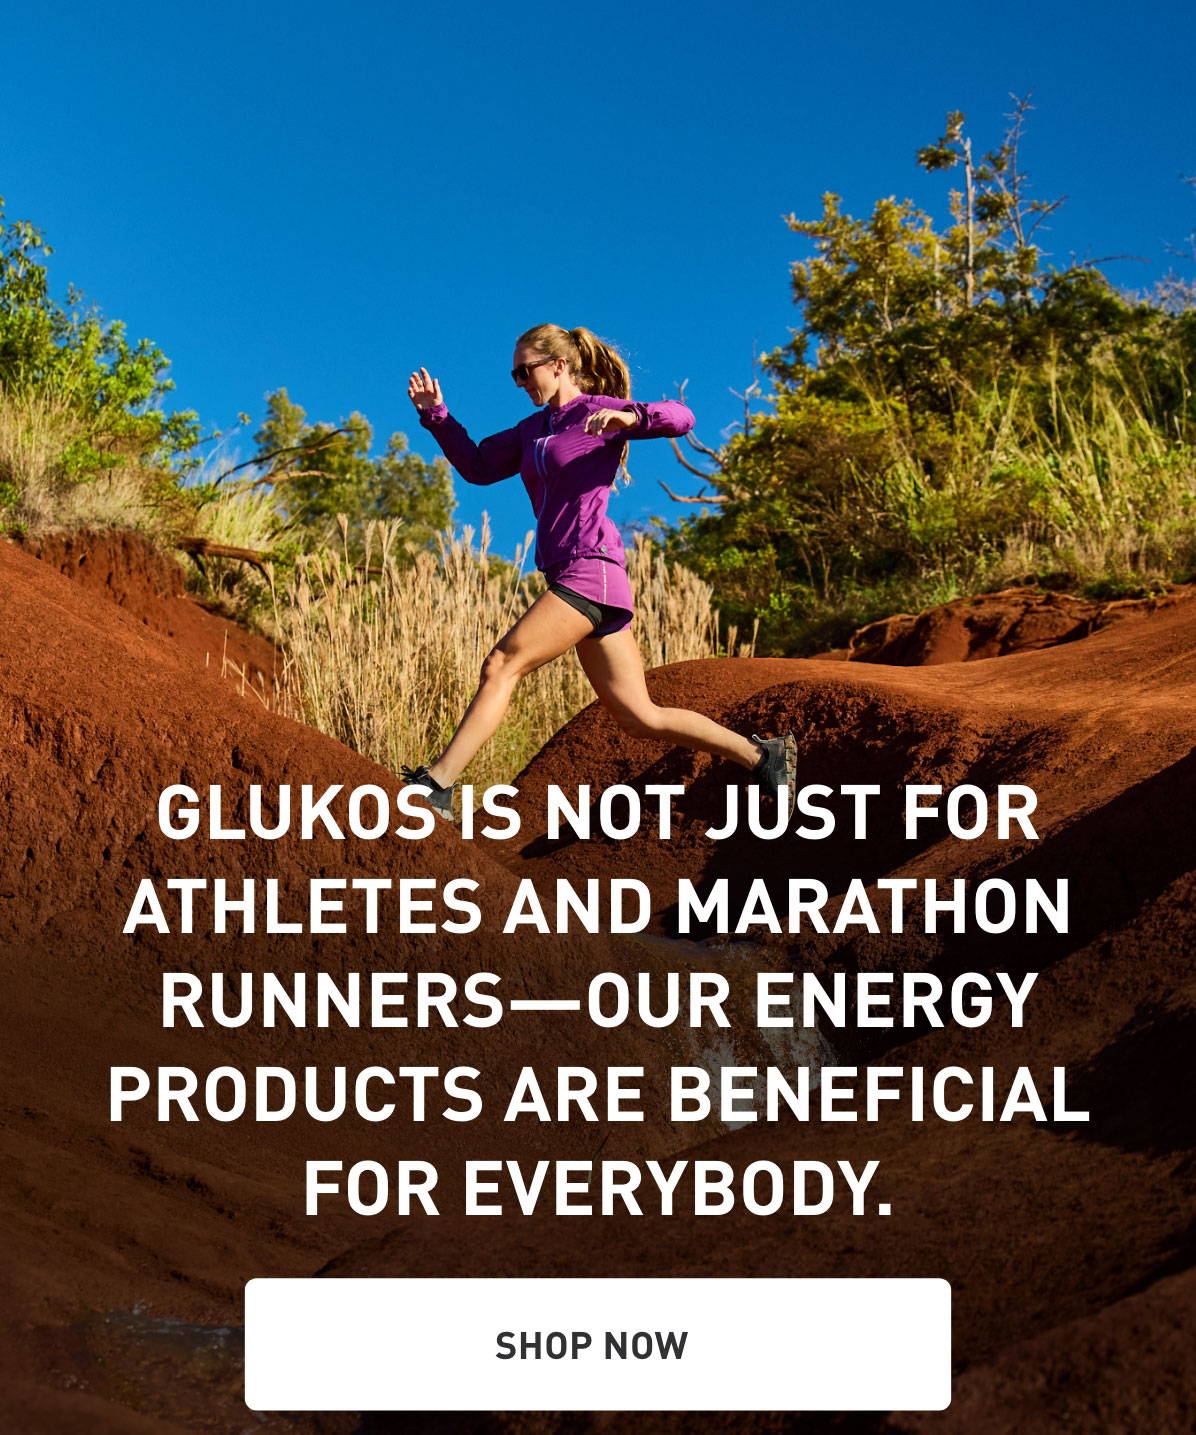 Glukos is not just for athletes and marathon runners - our energy products are beneficial for everybody SHOP NOW